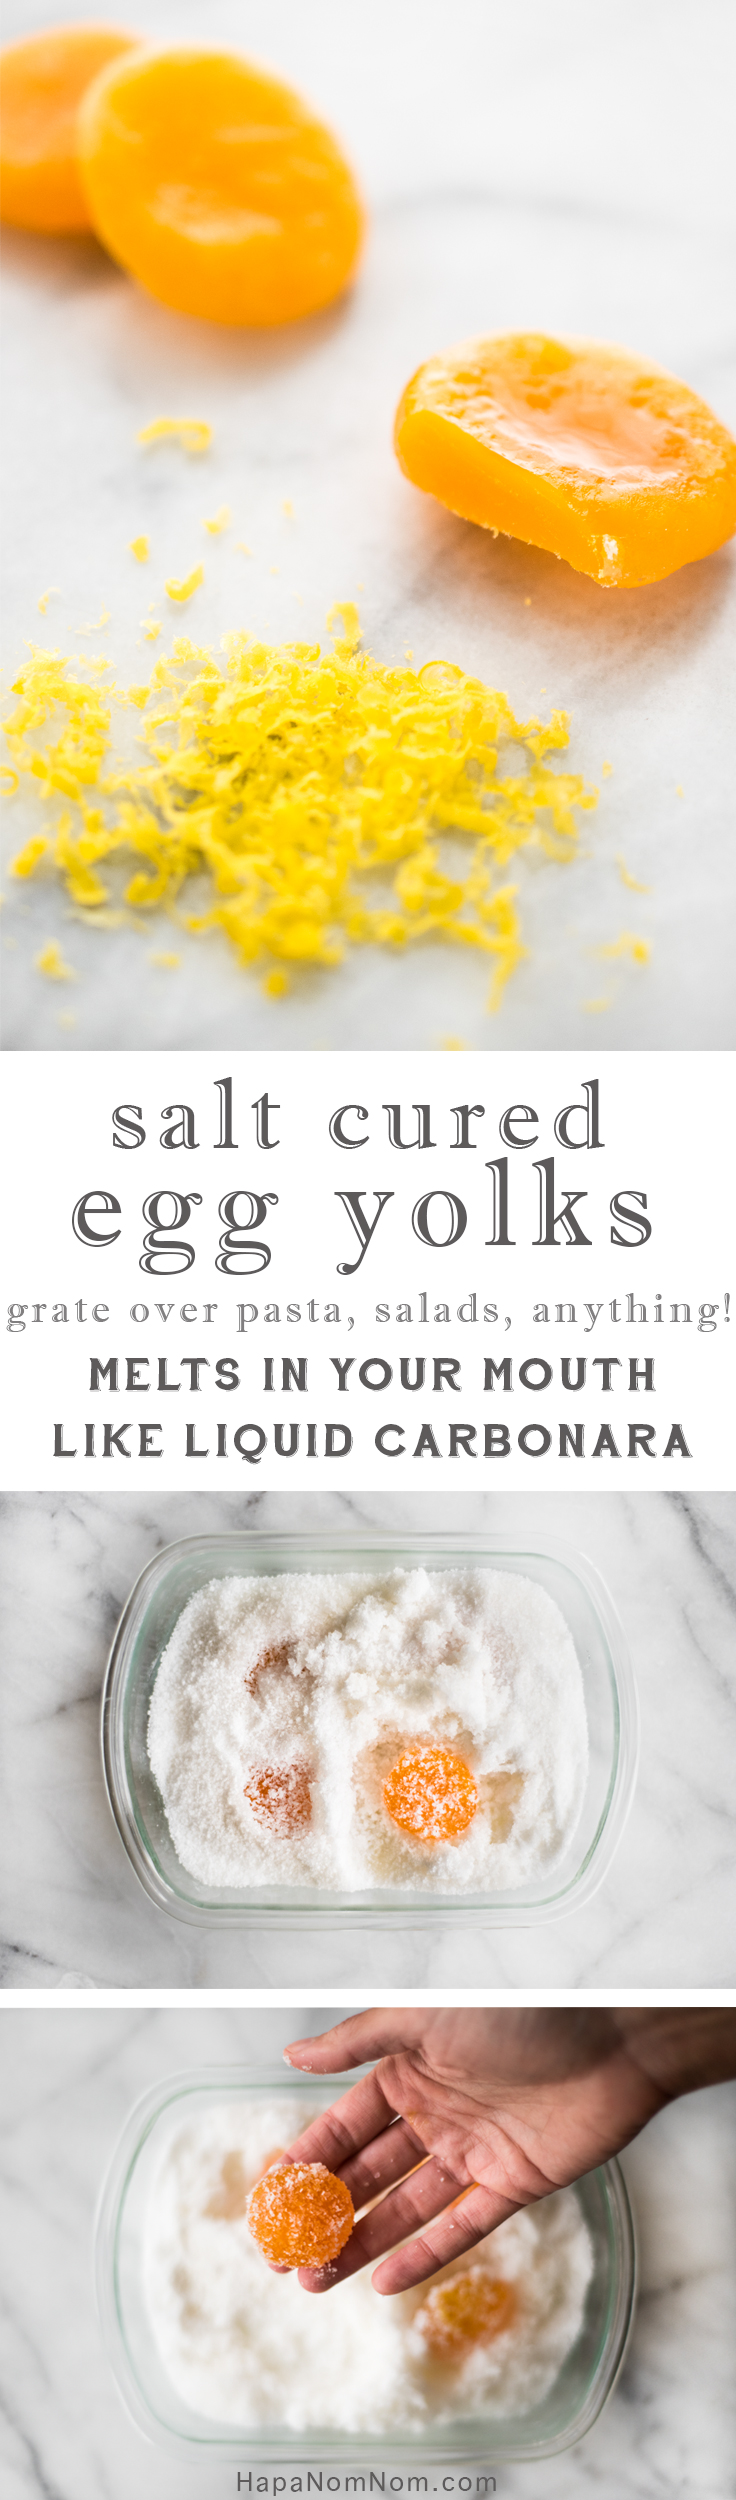 Golden curls of grated, Salt Cured Eggs melts in your mouth like liquid carbonara!